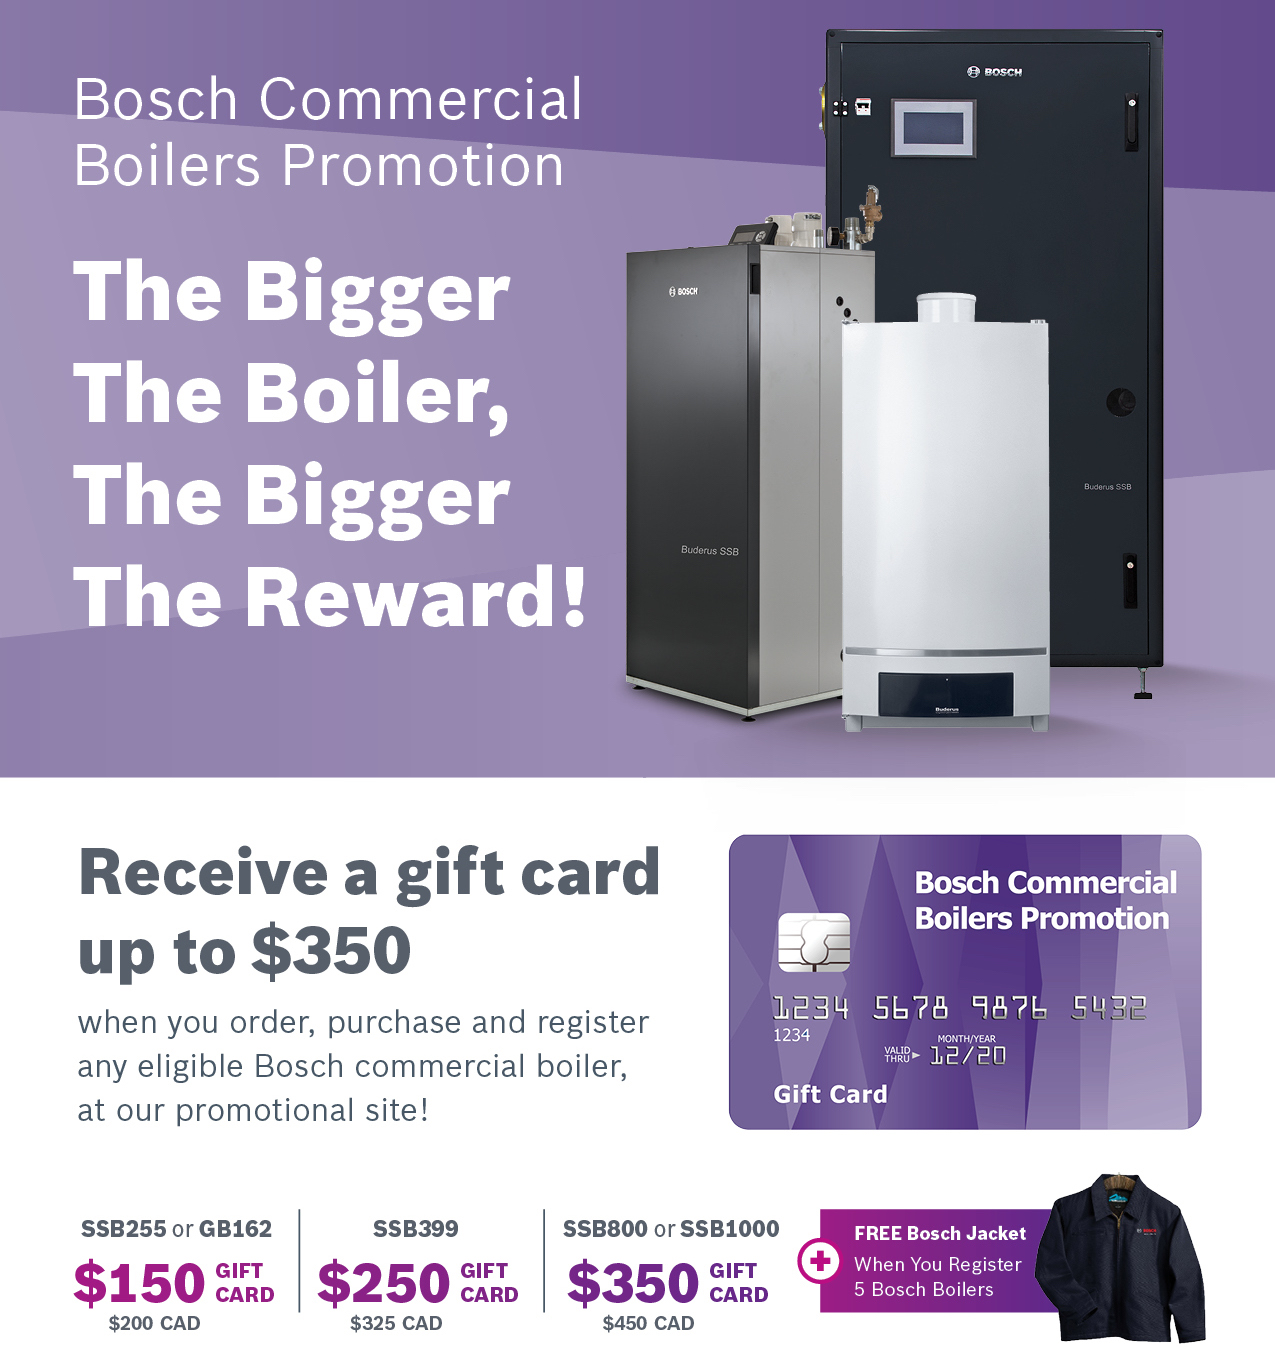 bosch-greentherm-tankless-water-heaters-bosch-commercial-boiler-promotion